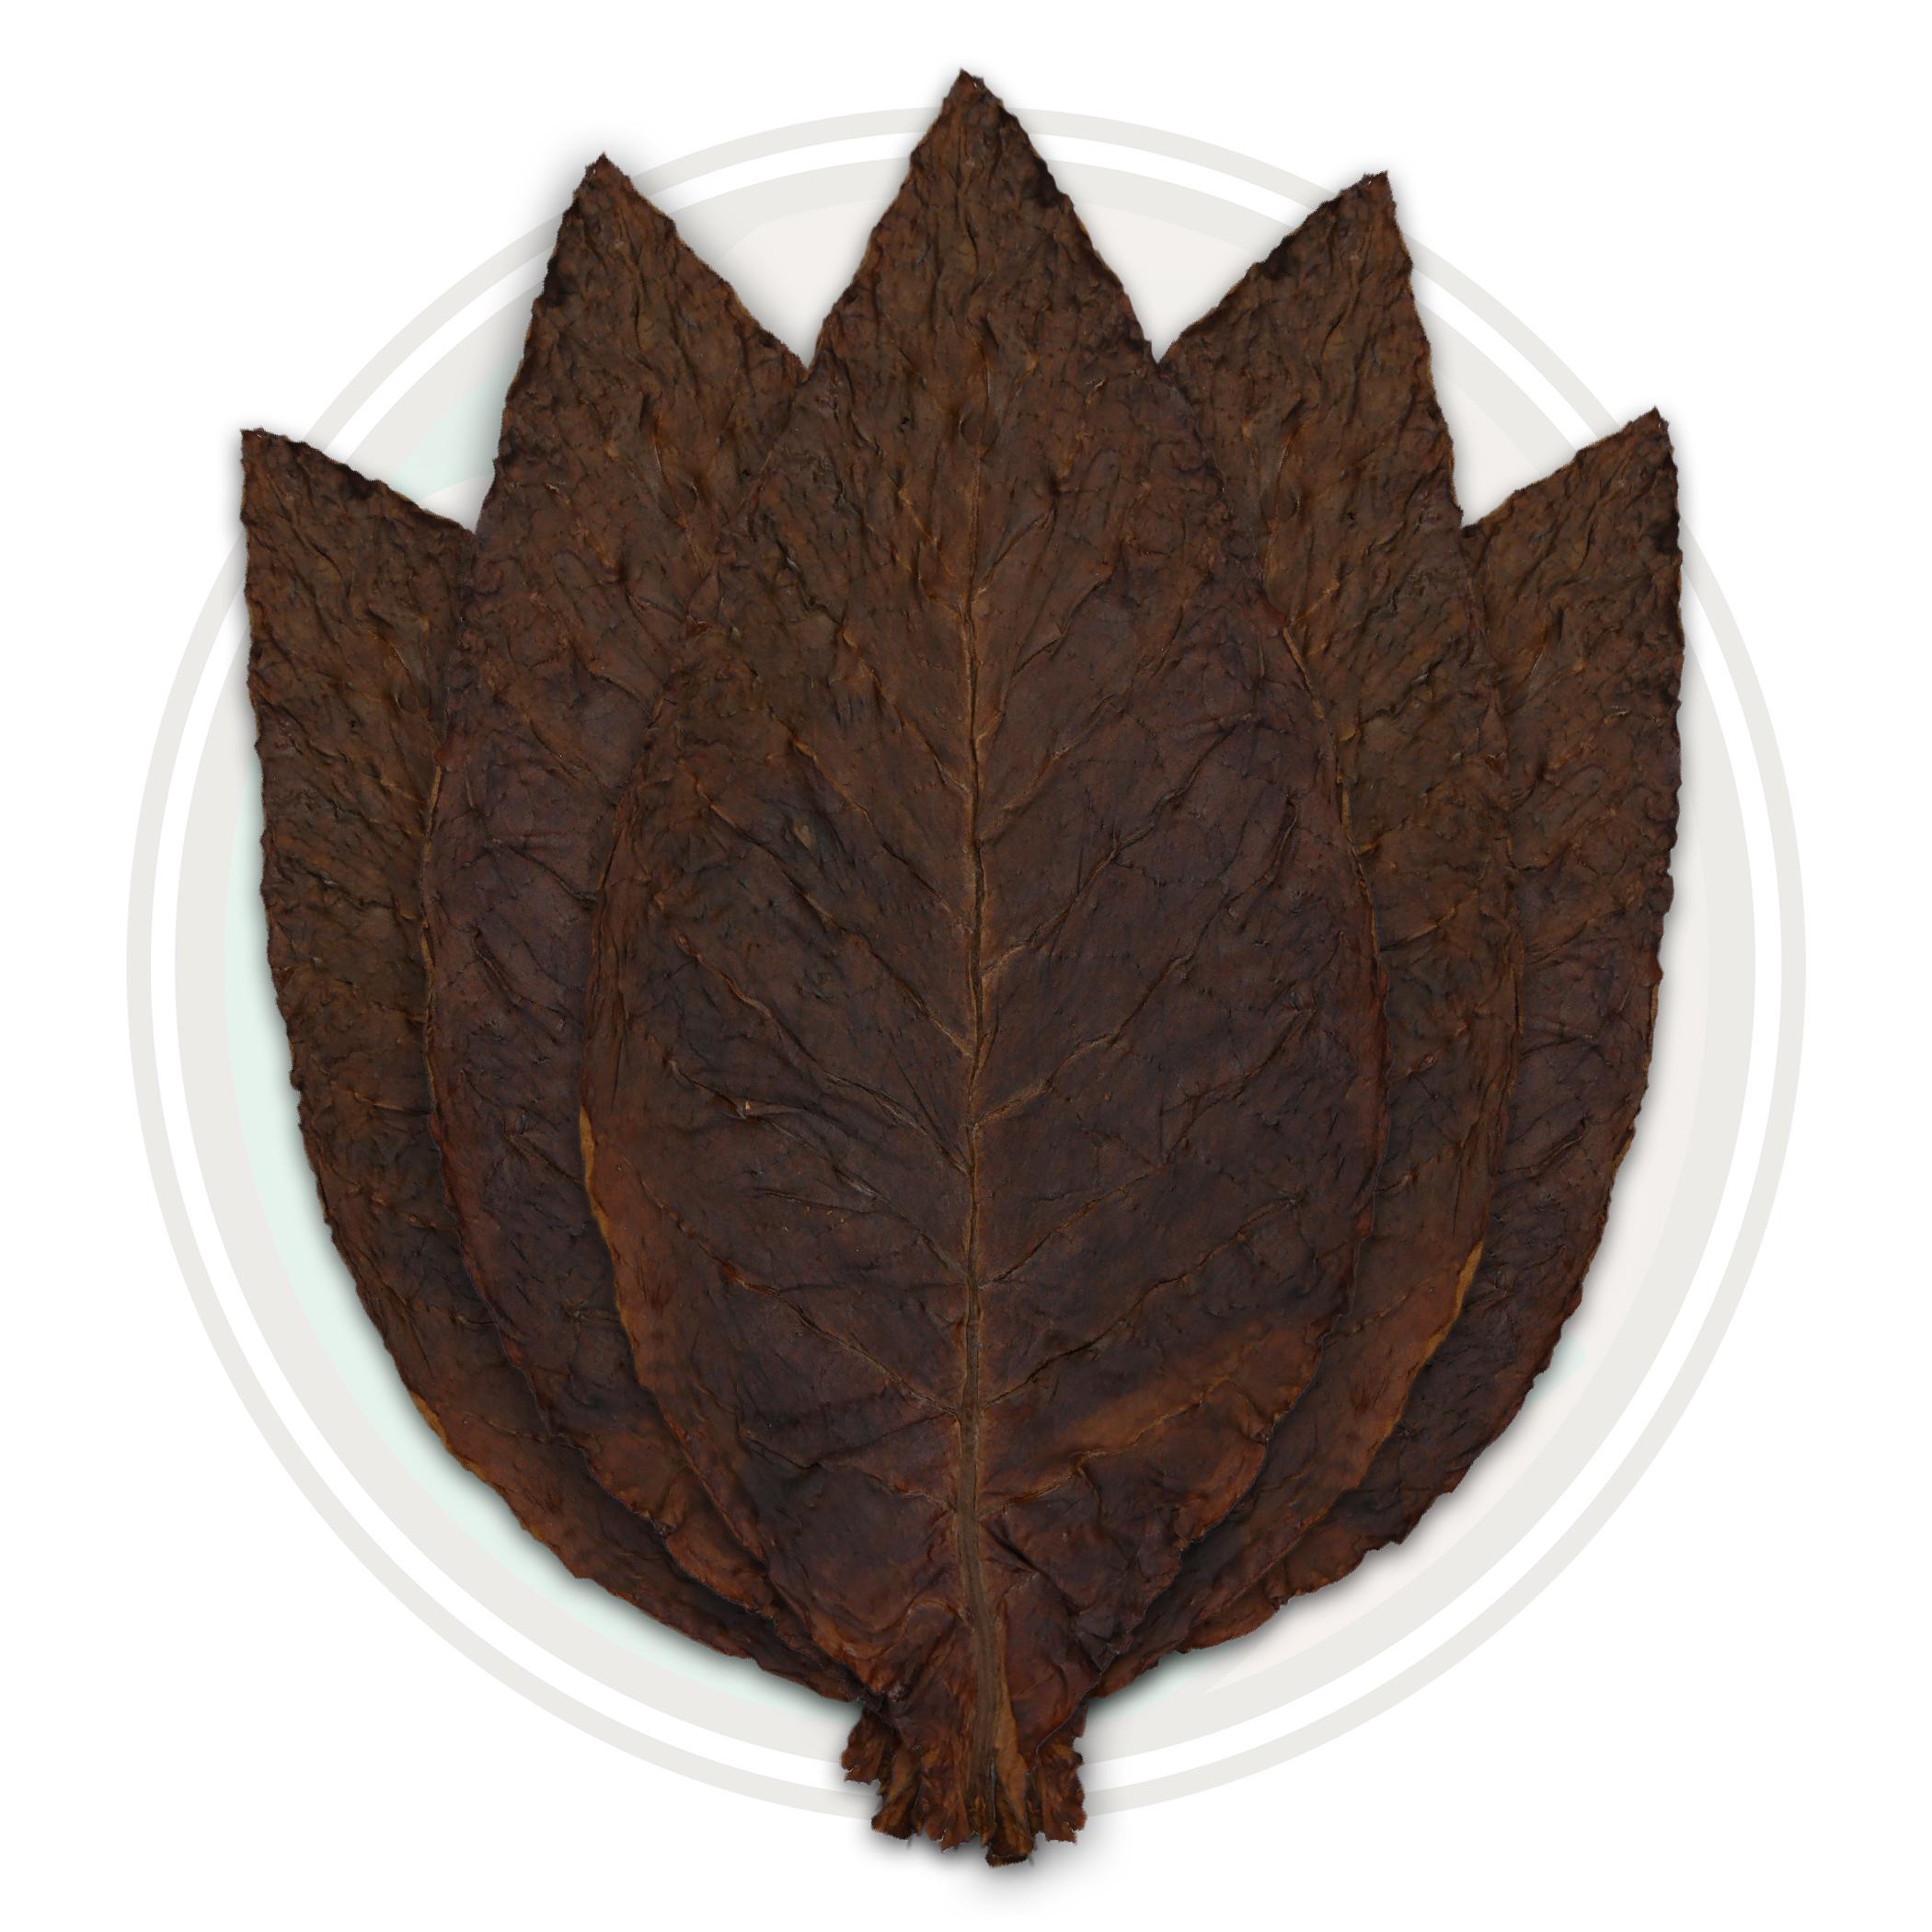 Light Fire Cured Virginia Whole Tobacco Leaf